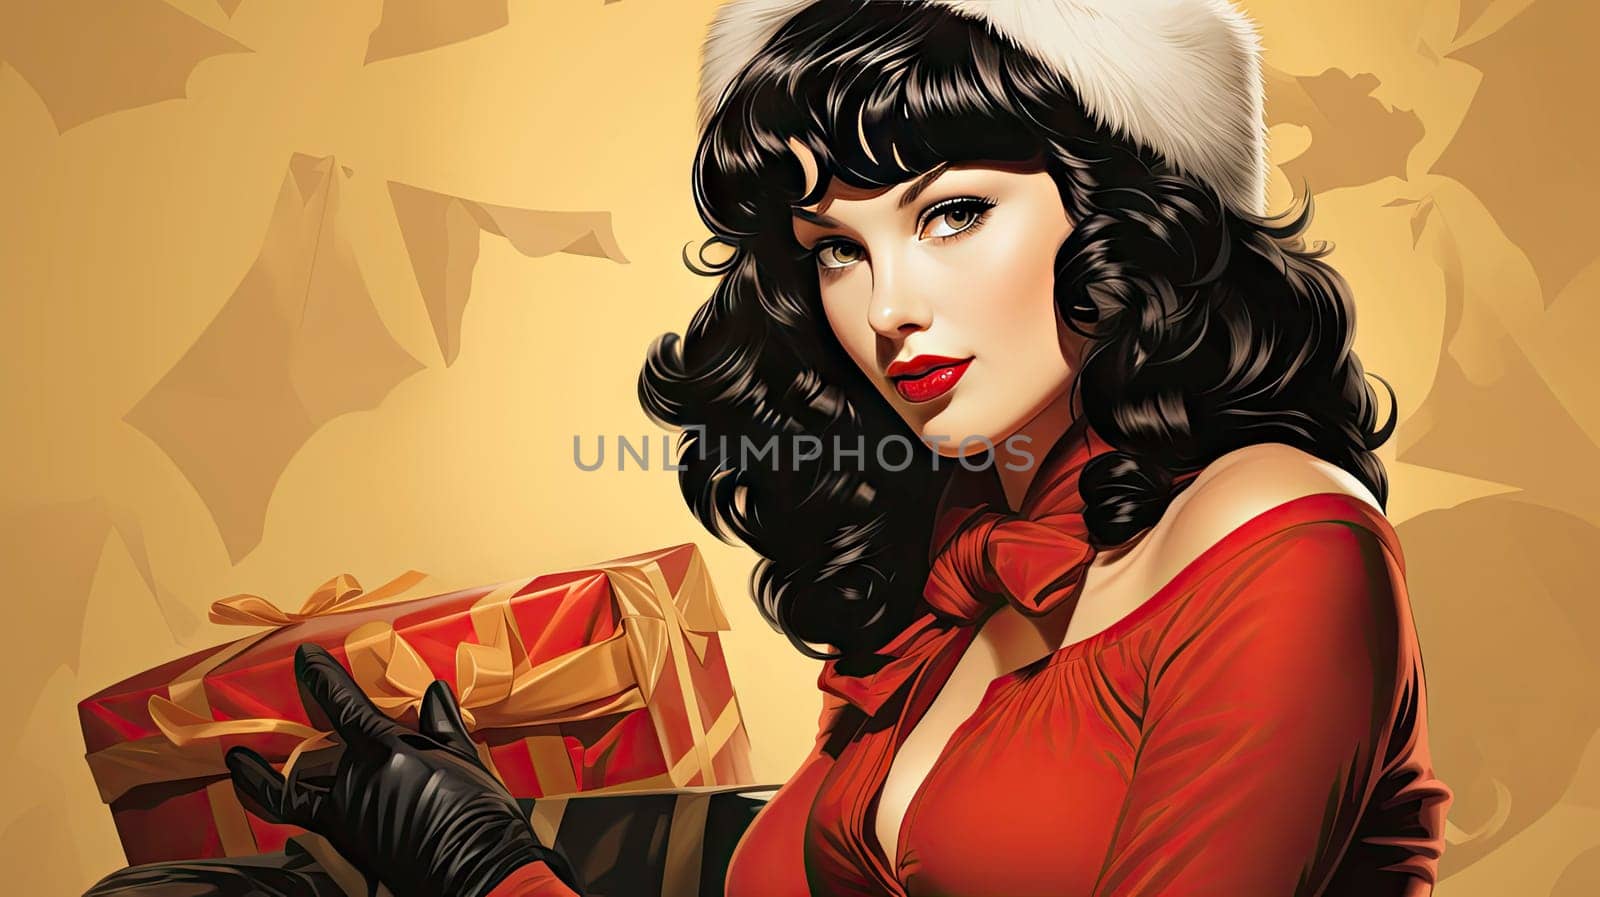 Beautiful pinup girl dressed as Santa Claus with gifts